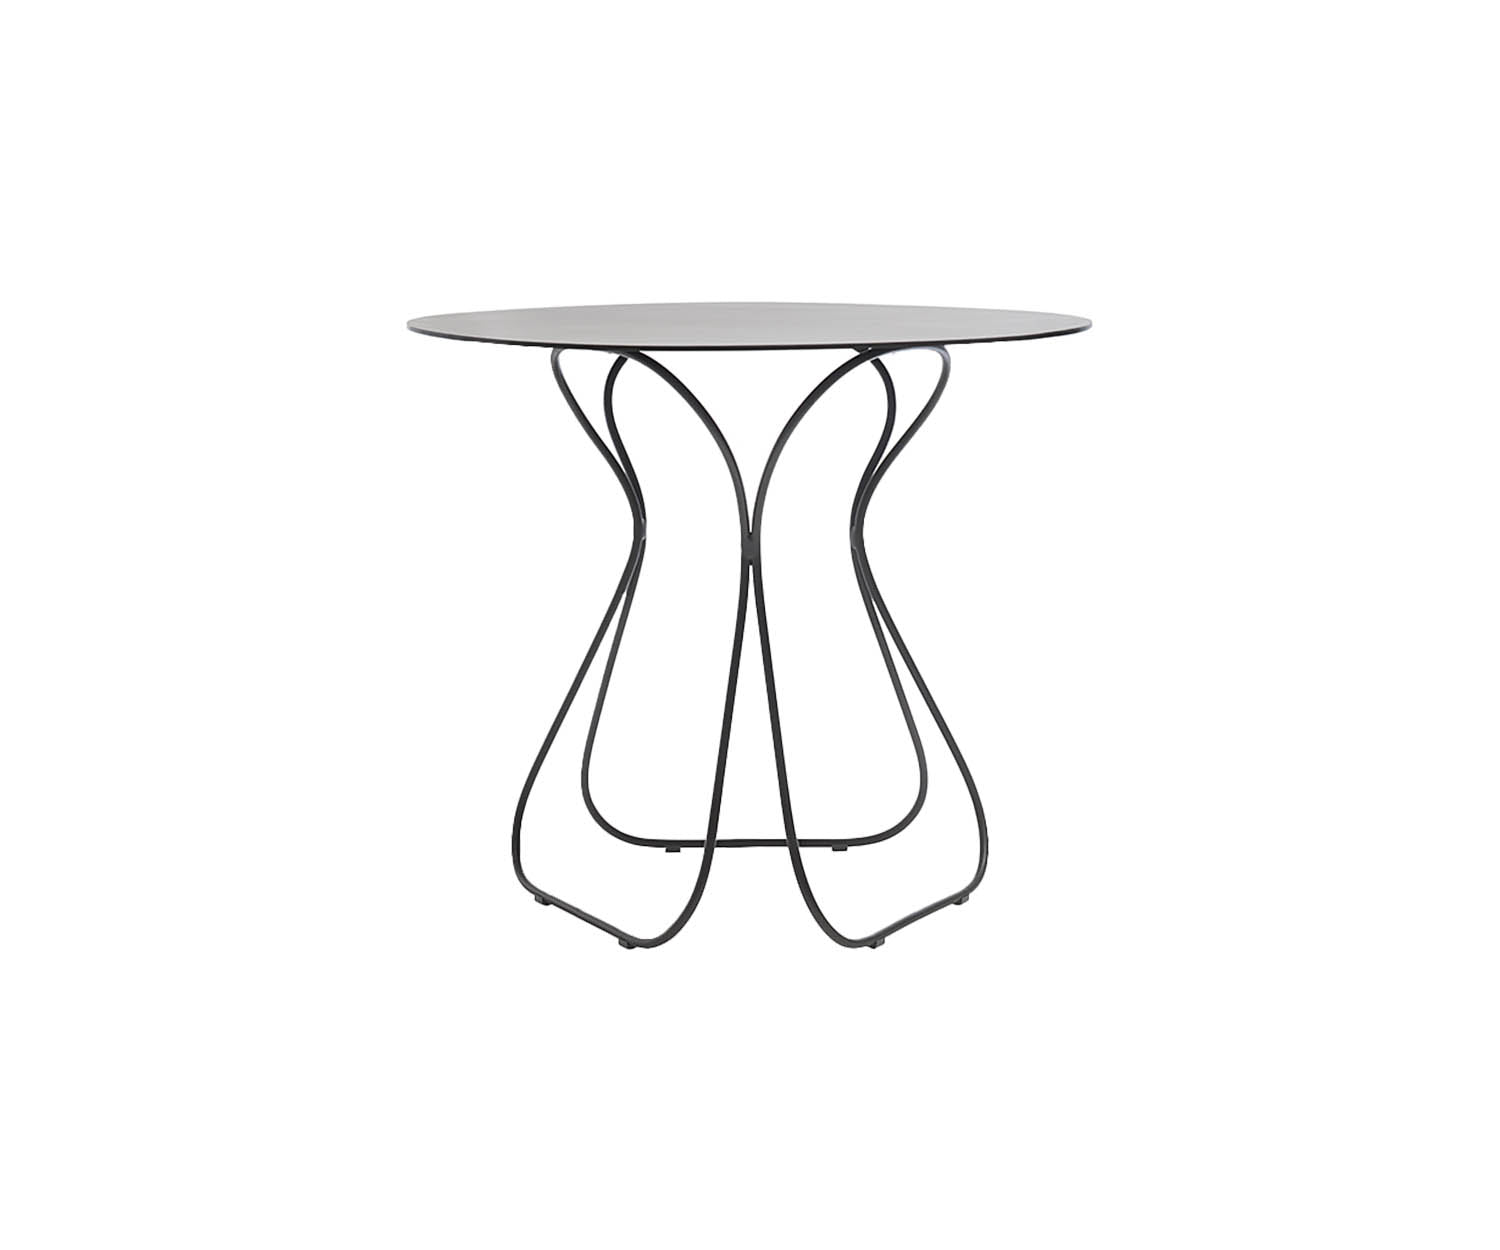 Kenneth Cobonpue, Trame Dining Table